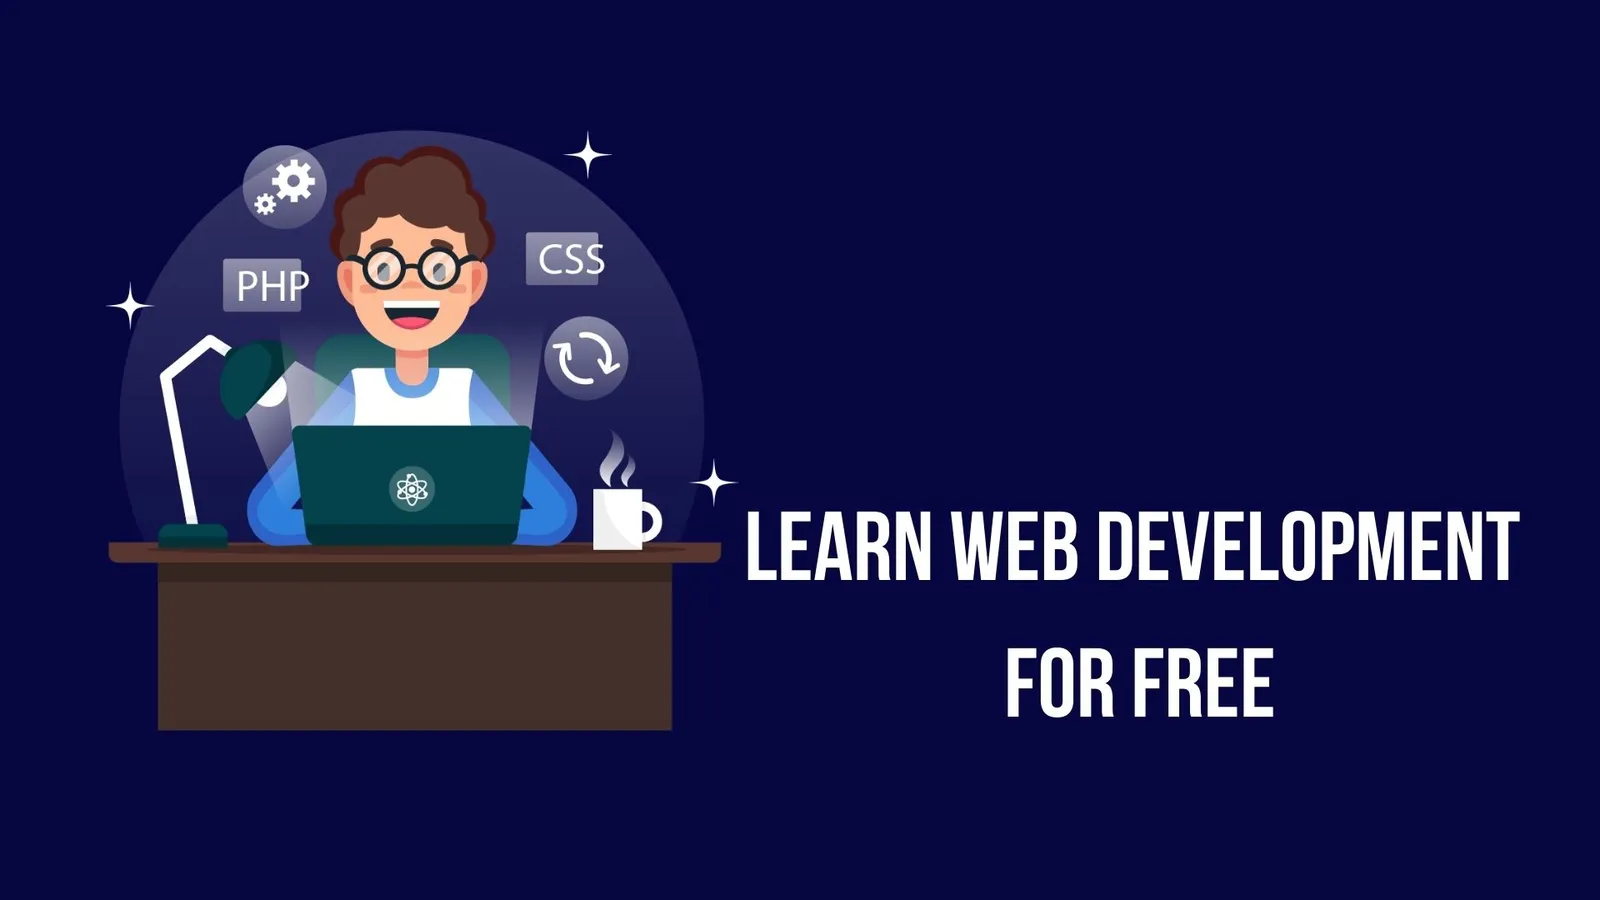 Learn Web Development with these Free Resources